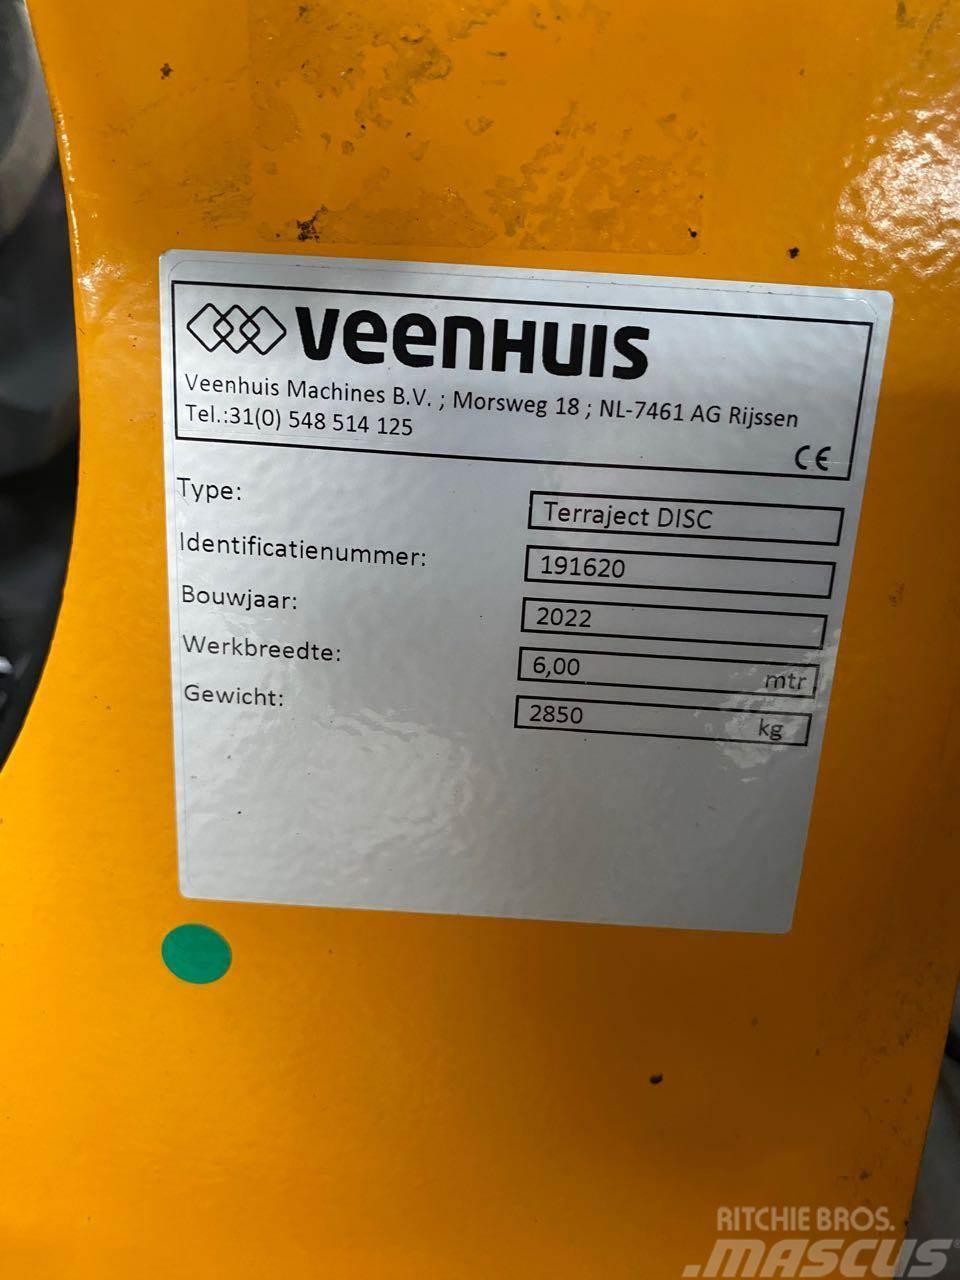 Veenhuis Terraject Disc 6.00 Other fertilizing machines and accessories